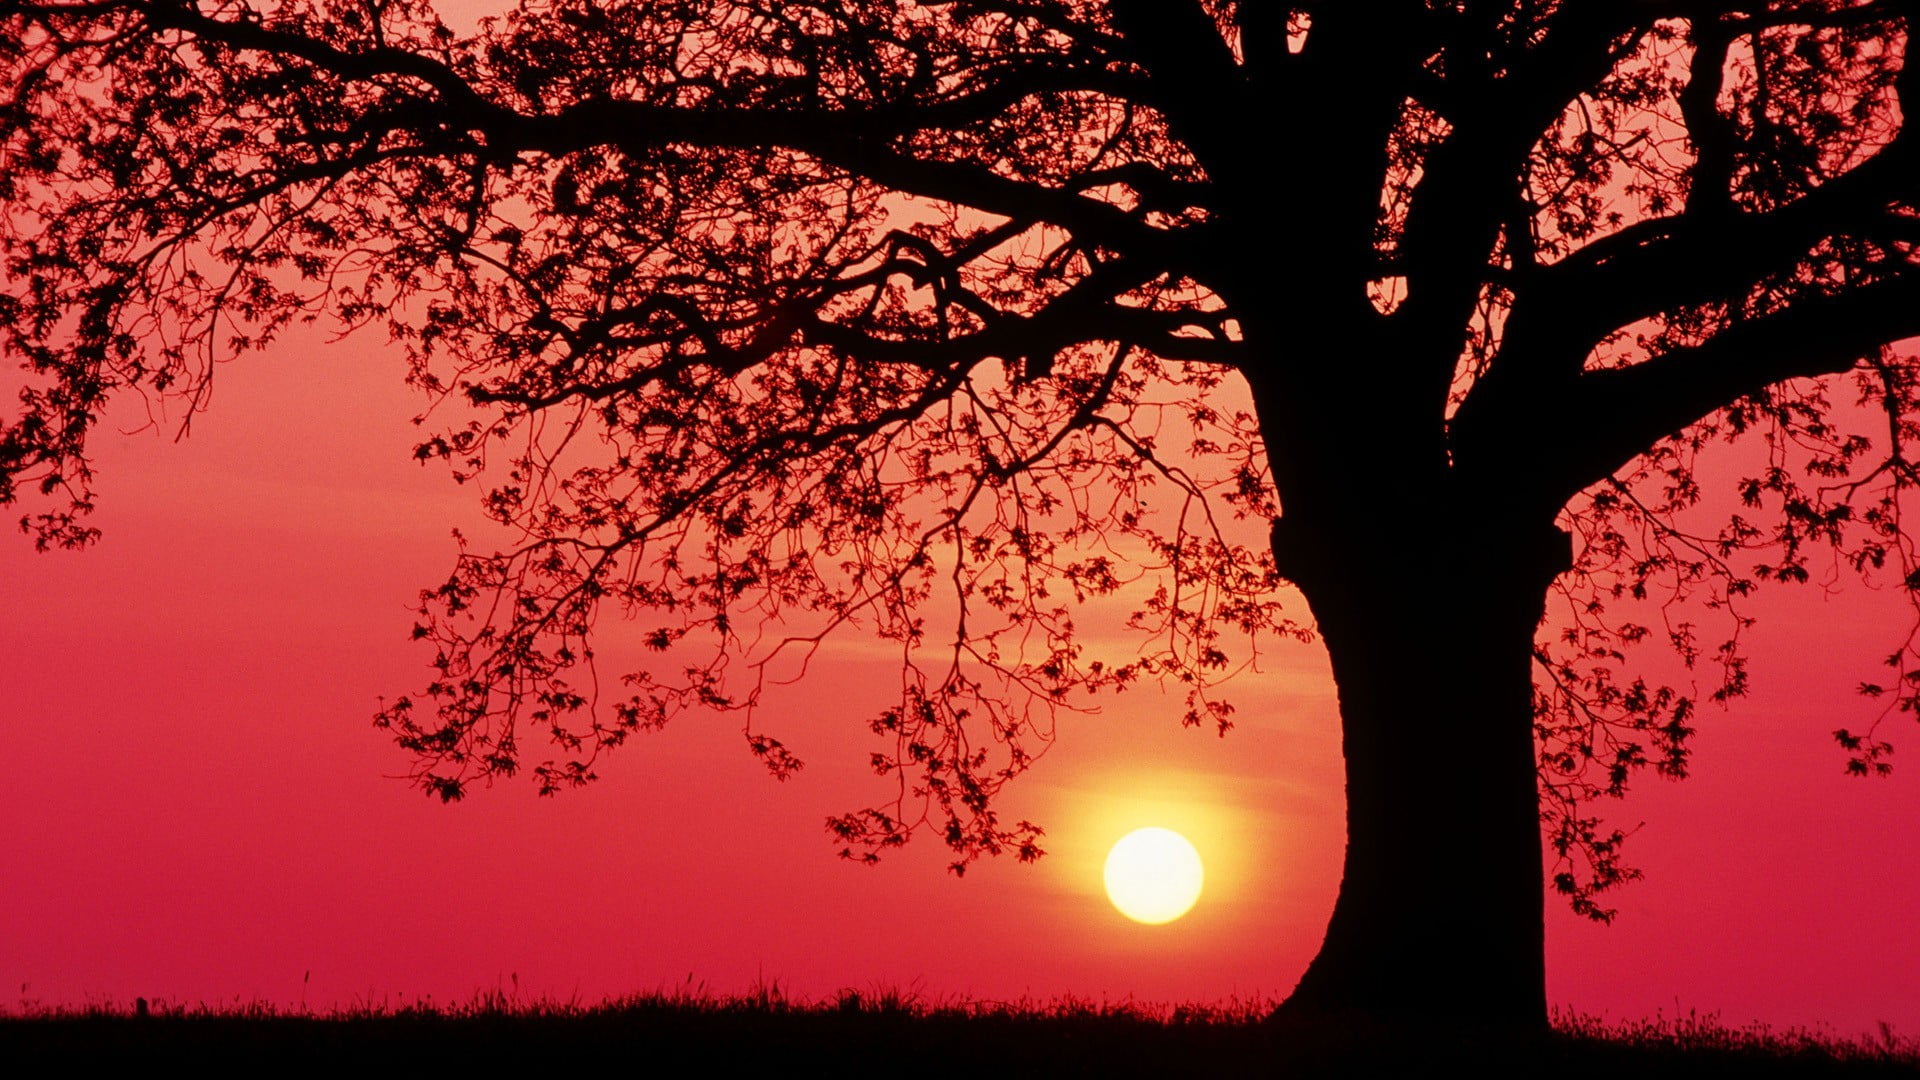 tree silhouette, sunset, trees, grass, red sky